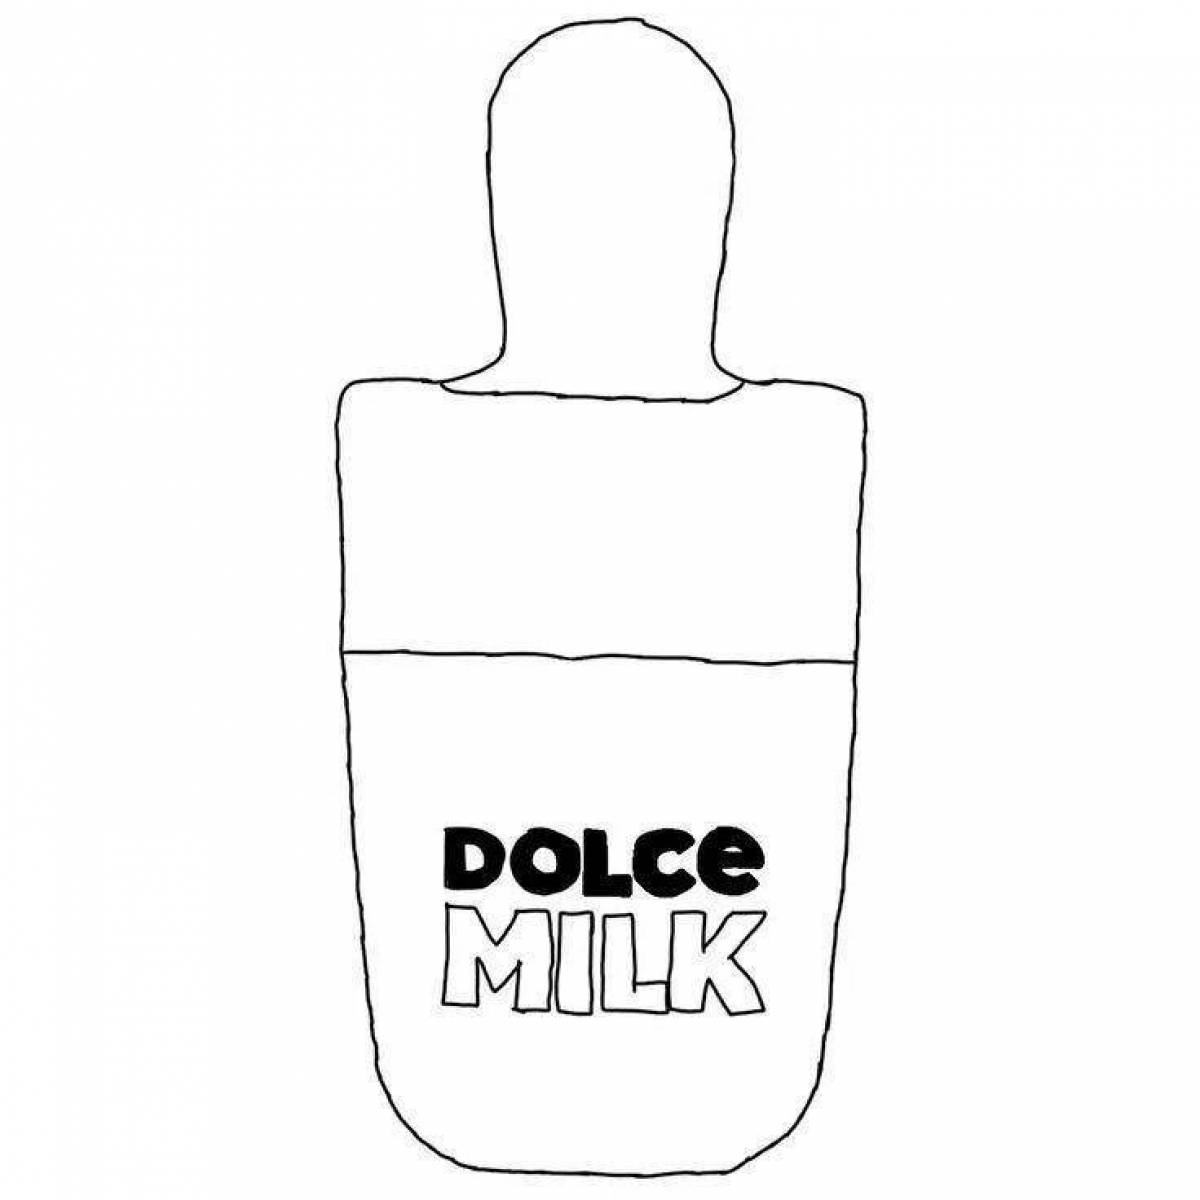 Coloring book fascinating milk cosmetics dolce